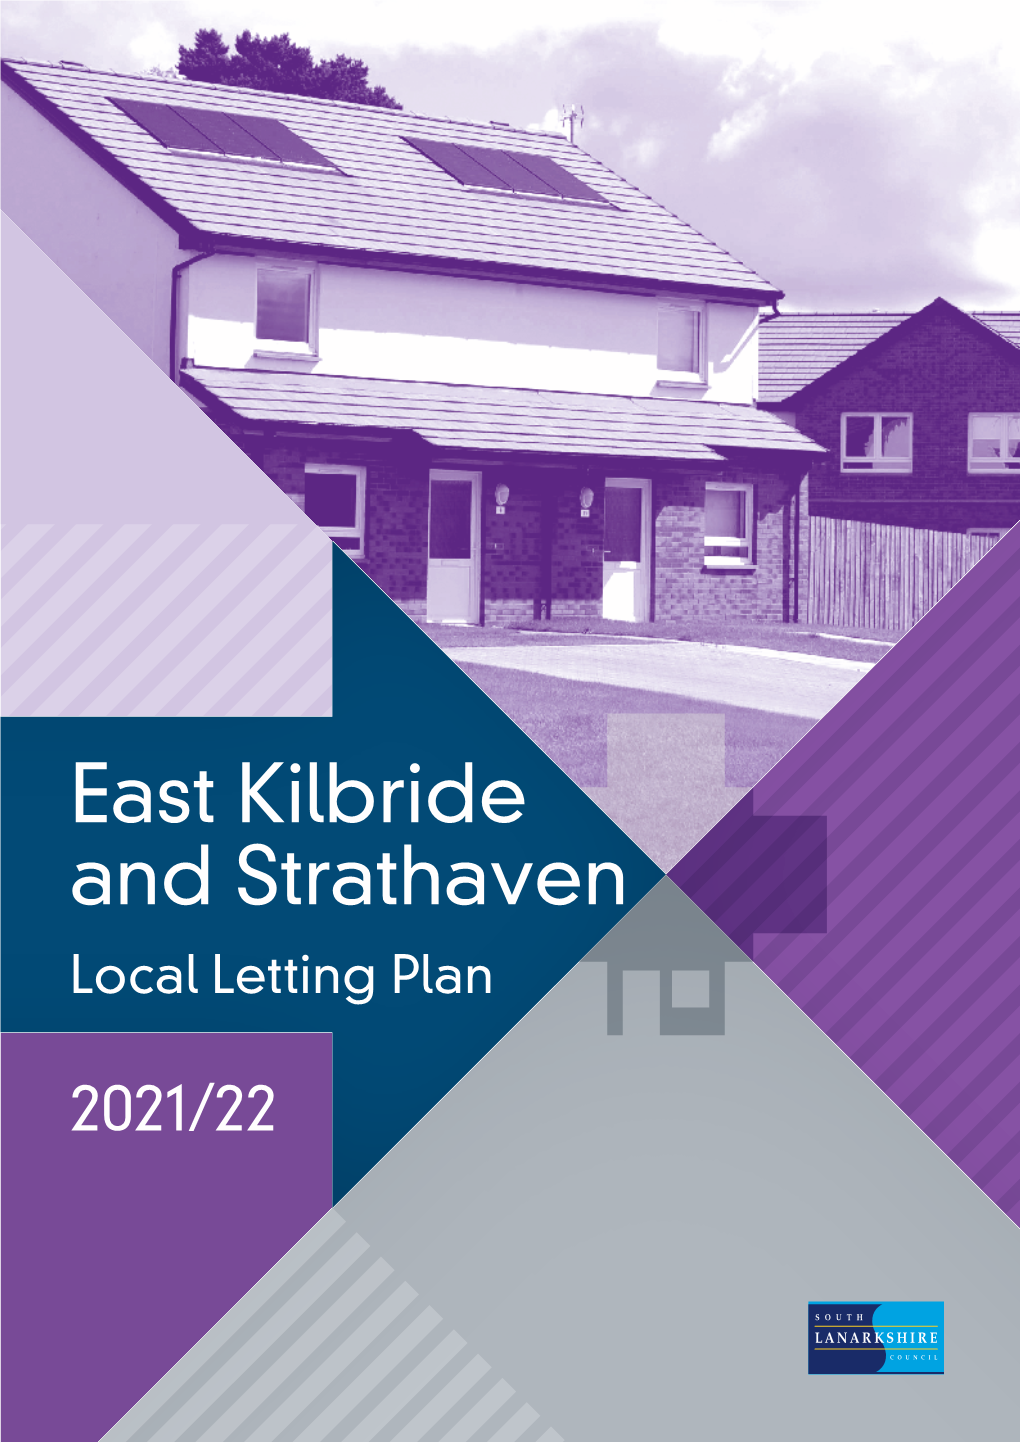 East Kilbride and Strathaven Local Letting Plan 2021/22